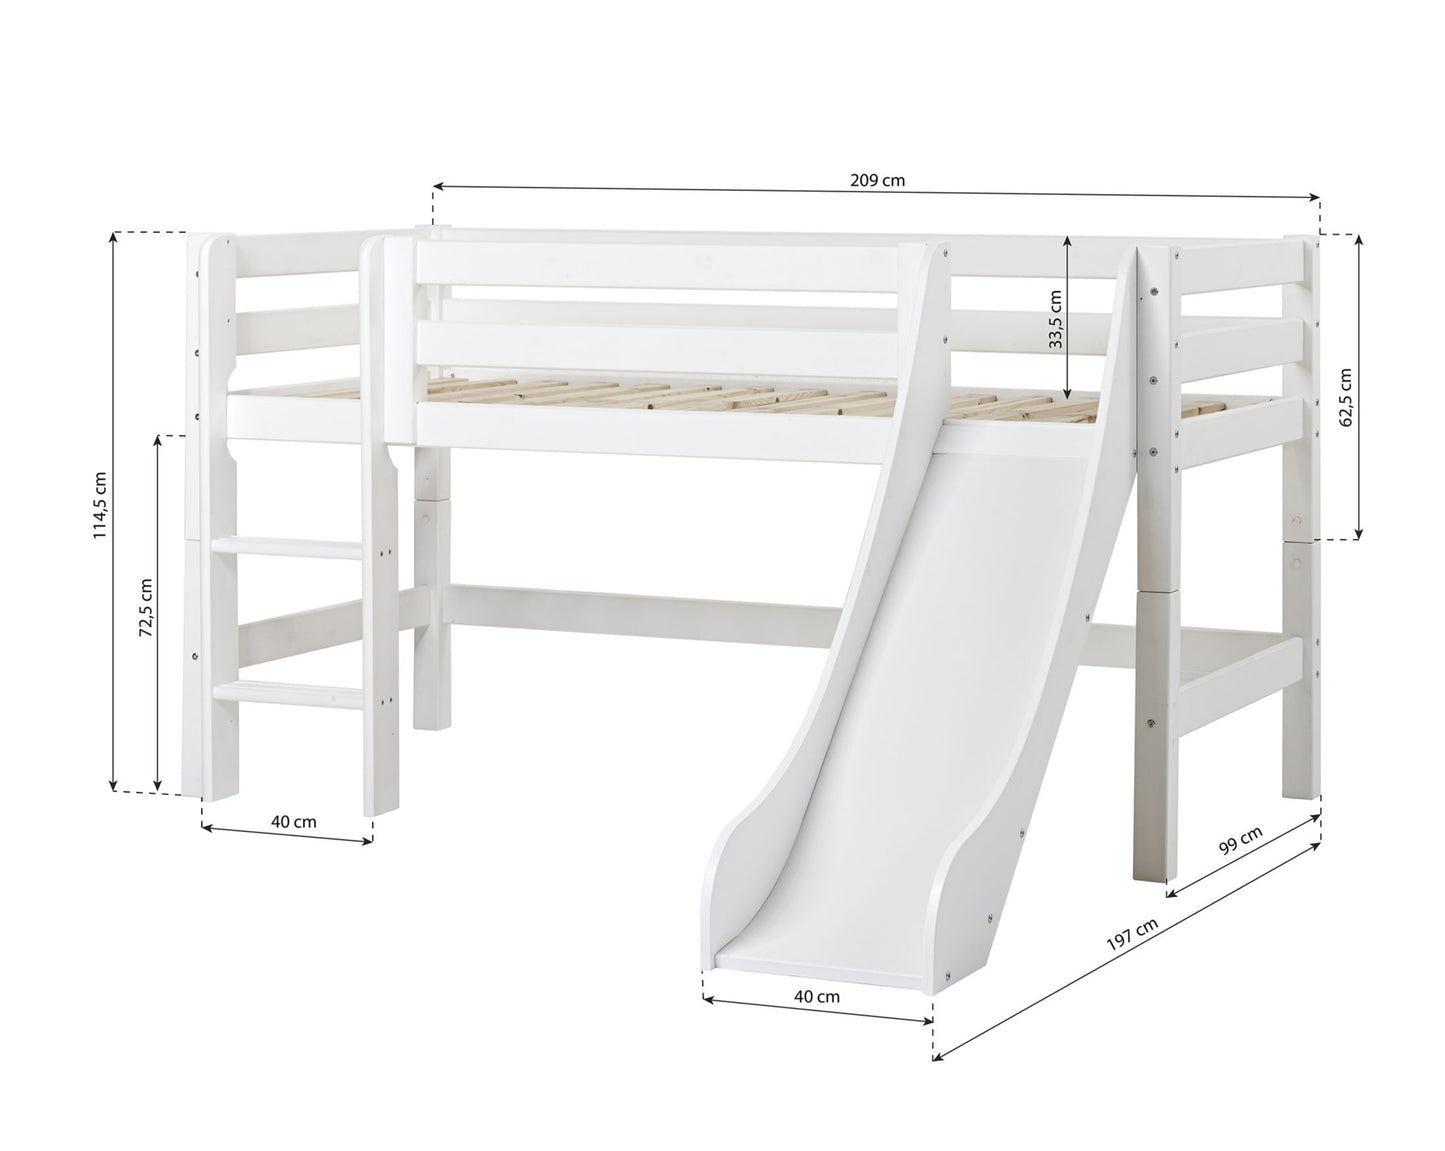 ECO Luxury - Half high bed with slide - 90x200 cm - white